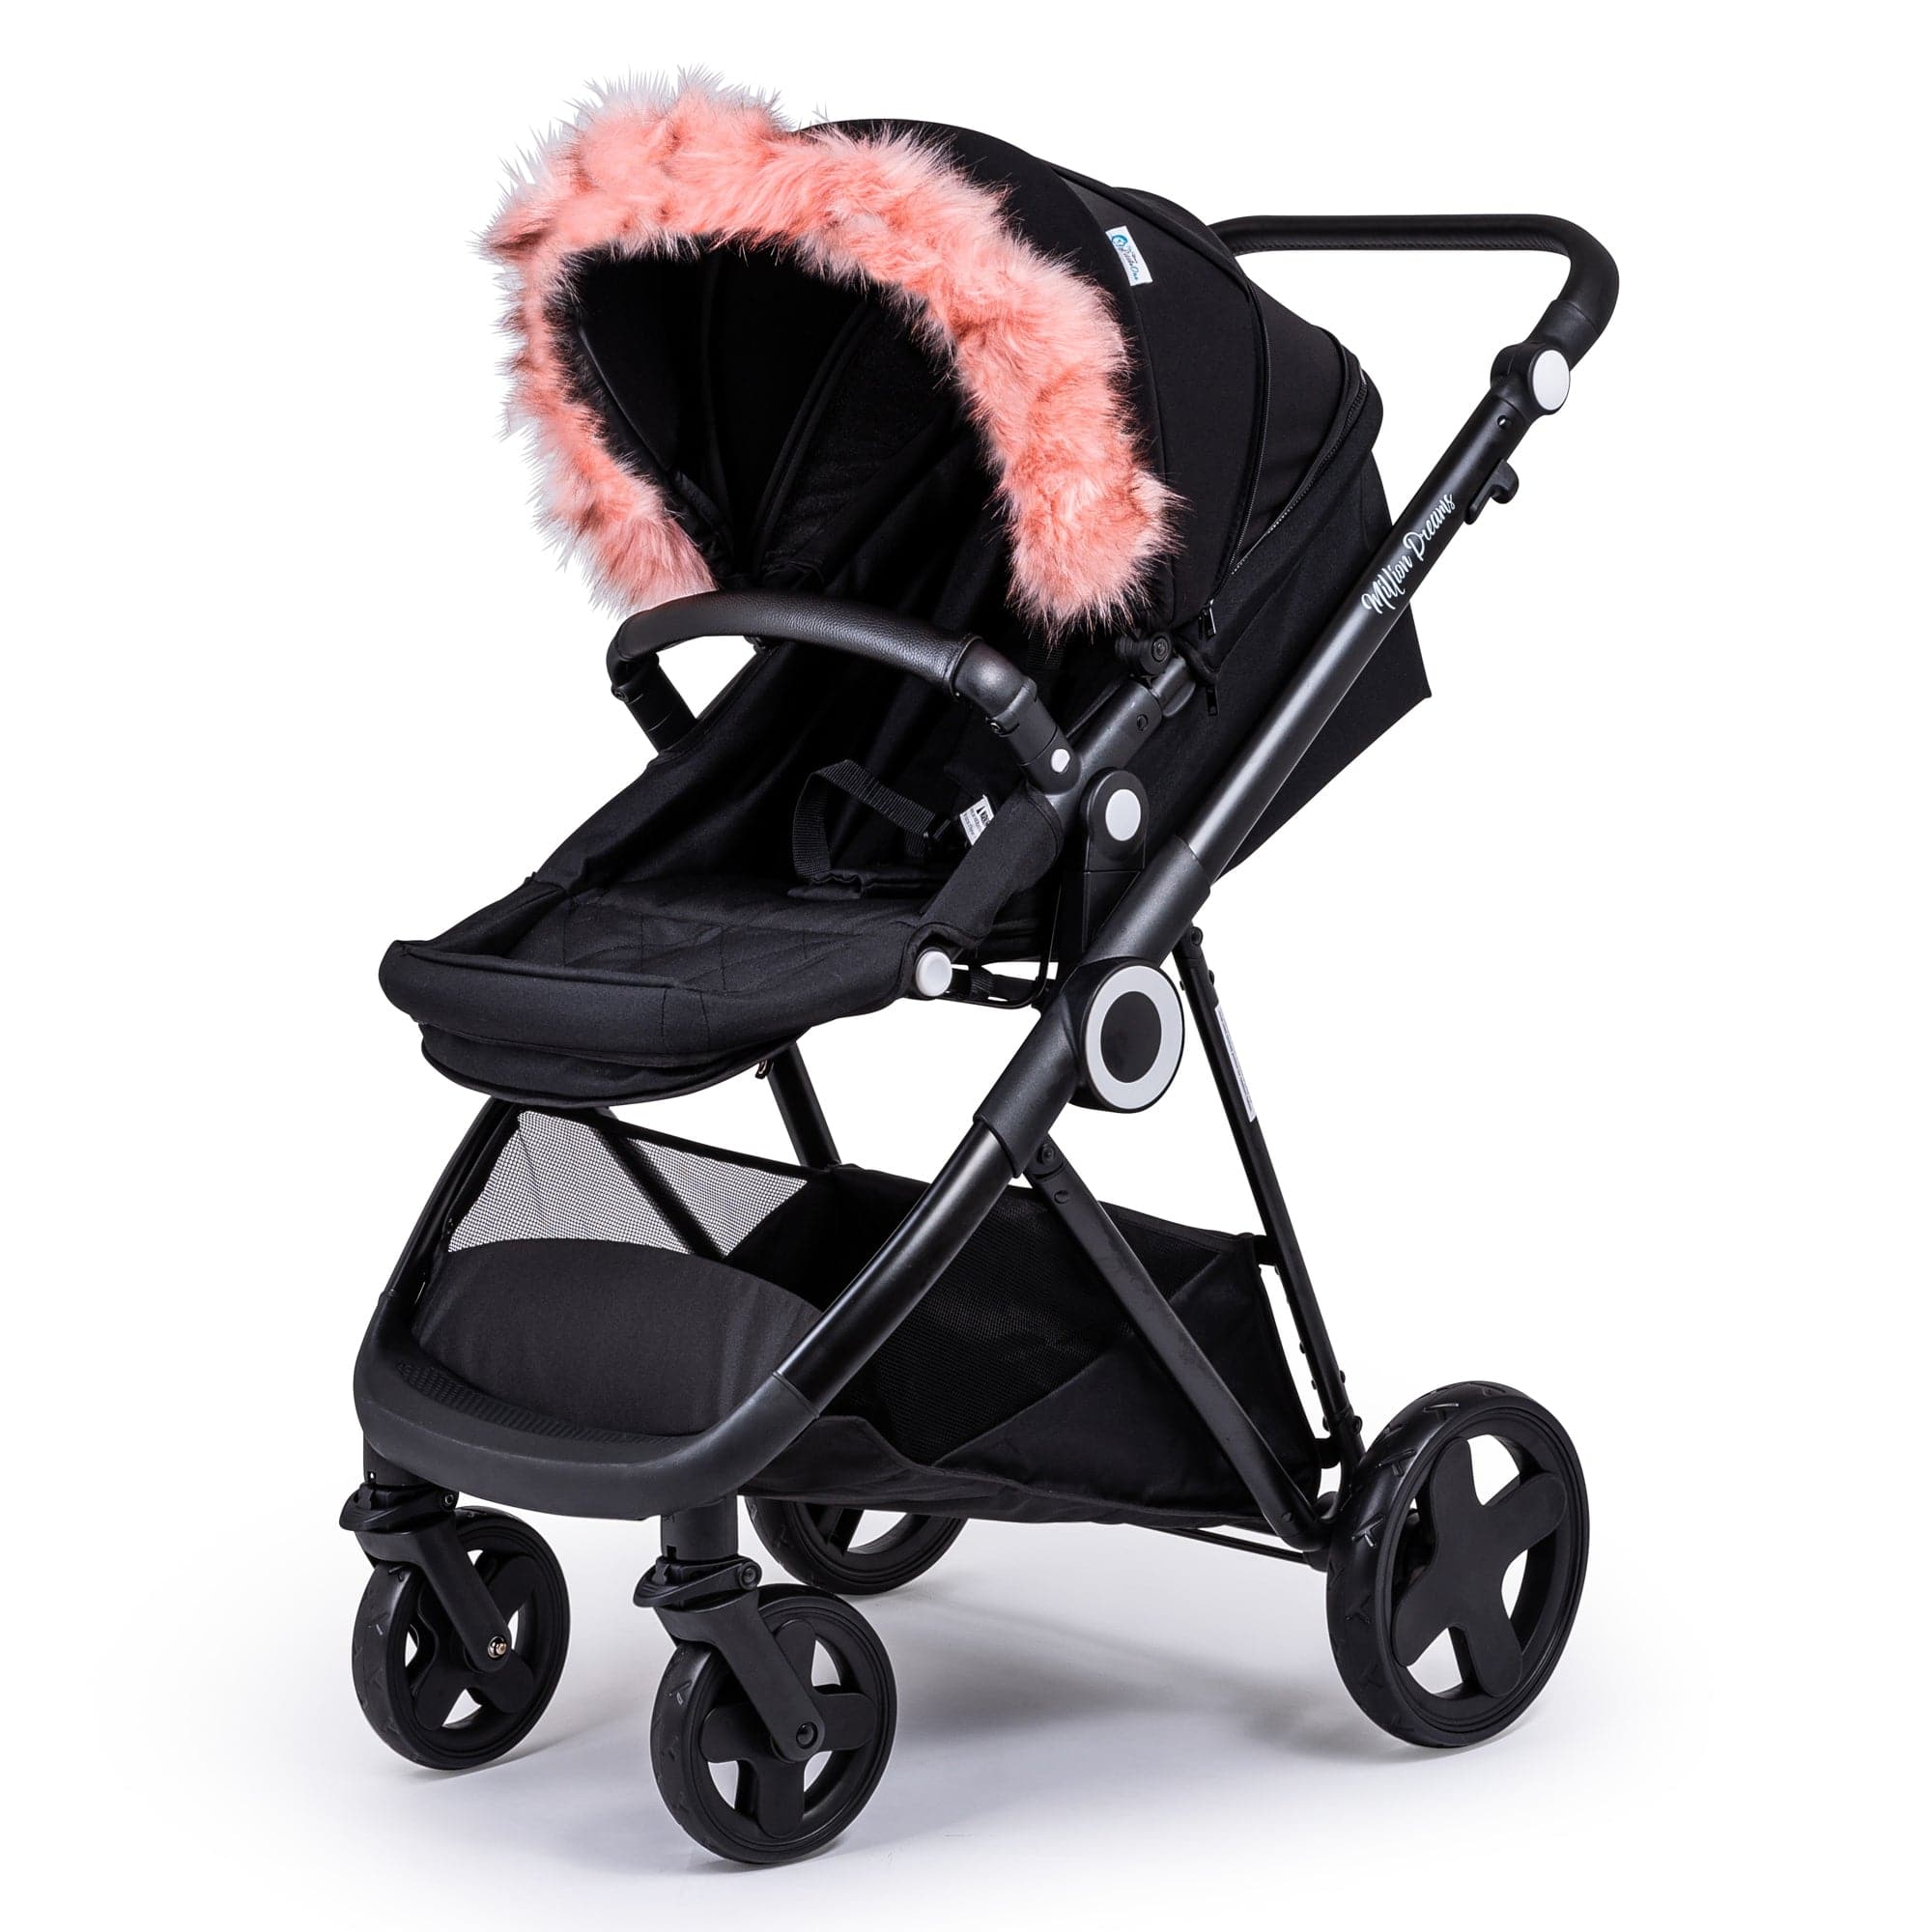 Pram Fur Hood Trim Attachment For Pushchair Compatible with Nuna - Pink / Fits All Models | For Your Little One